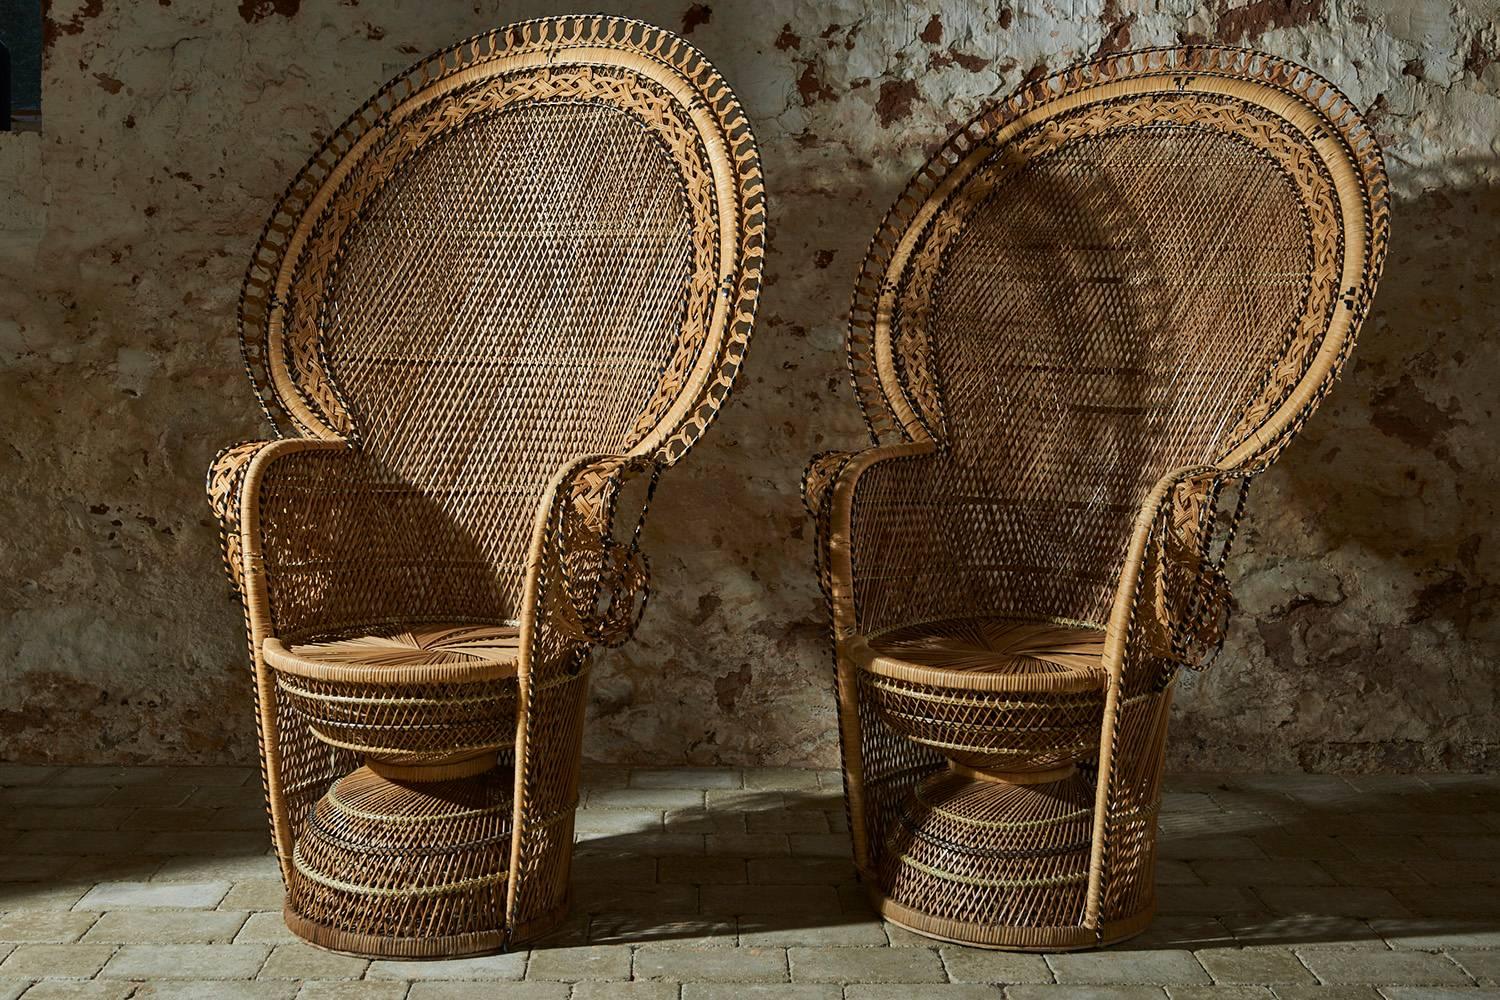 Outstanding matching pair of Italian Peacock chairs made famous by the 1970s film Emanuelle in excellent vintage condition.